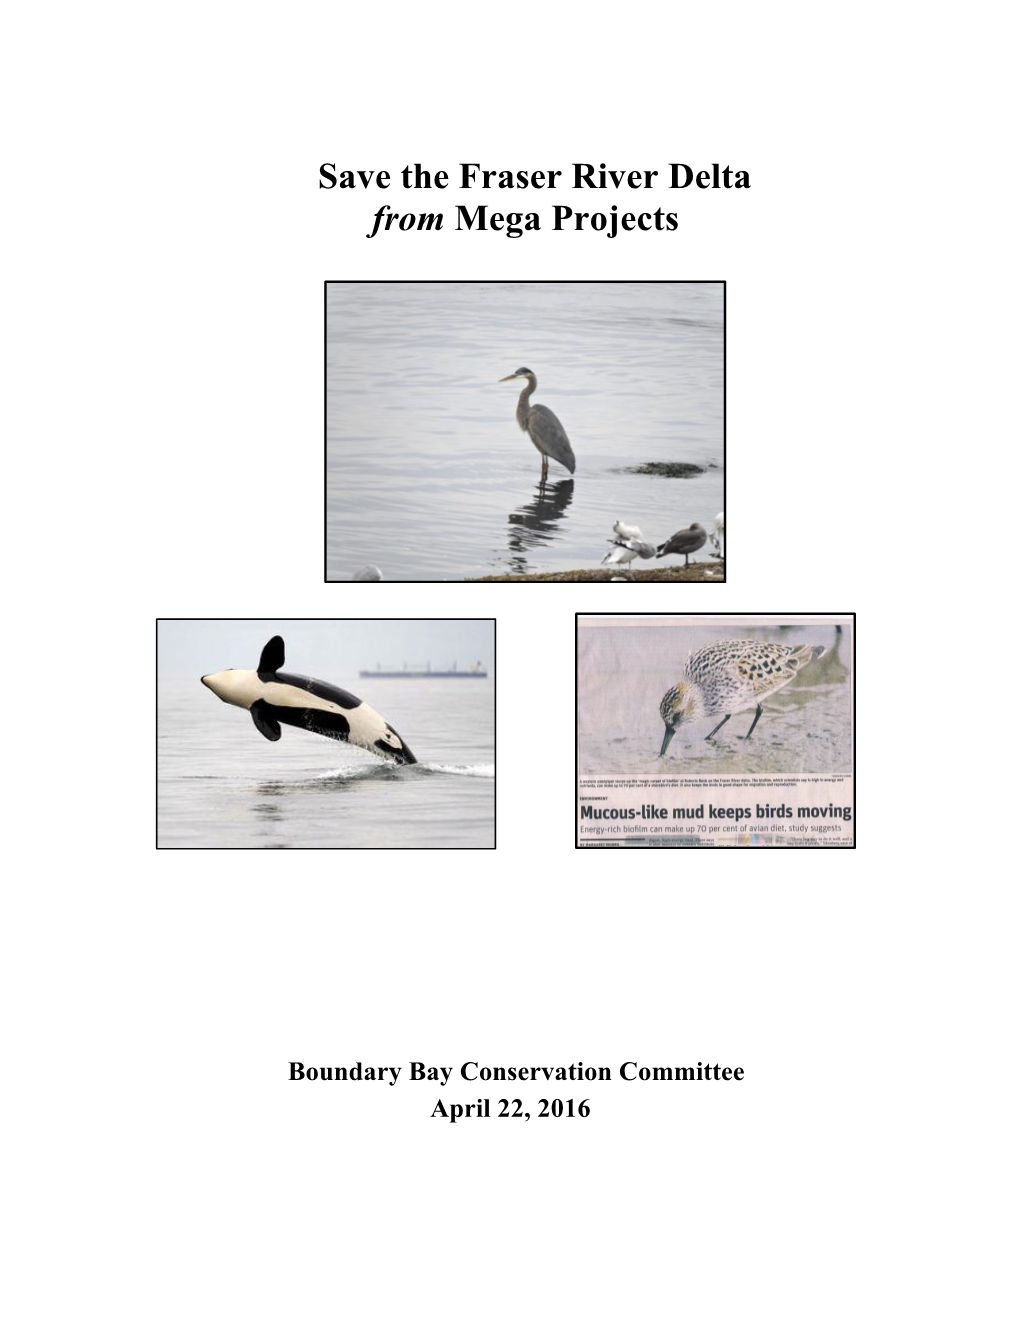 Save the Fraser River Delta from Mega Projects